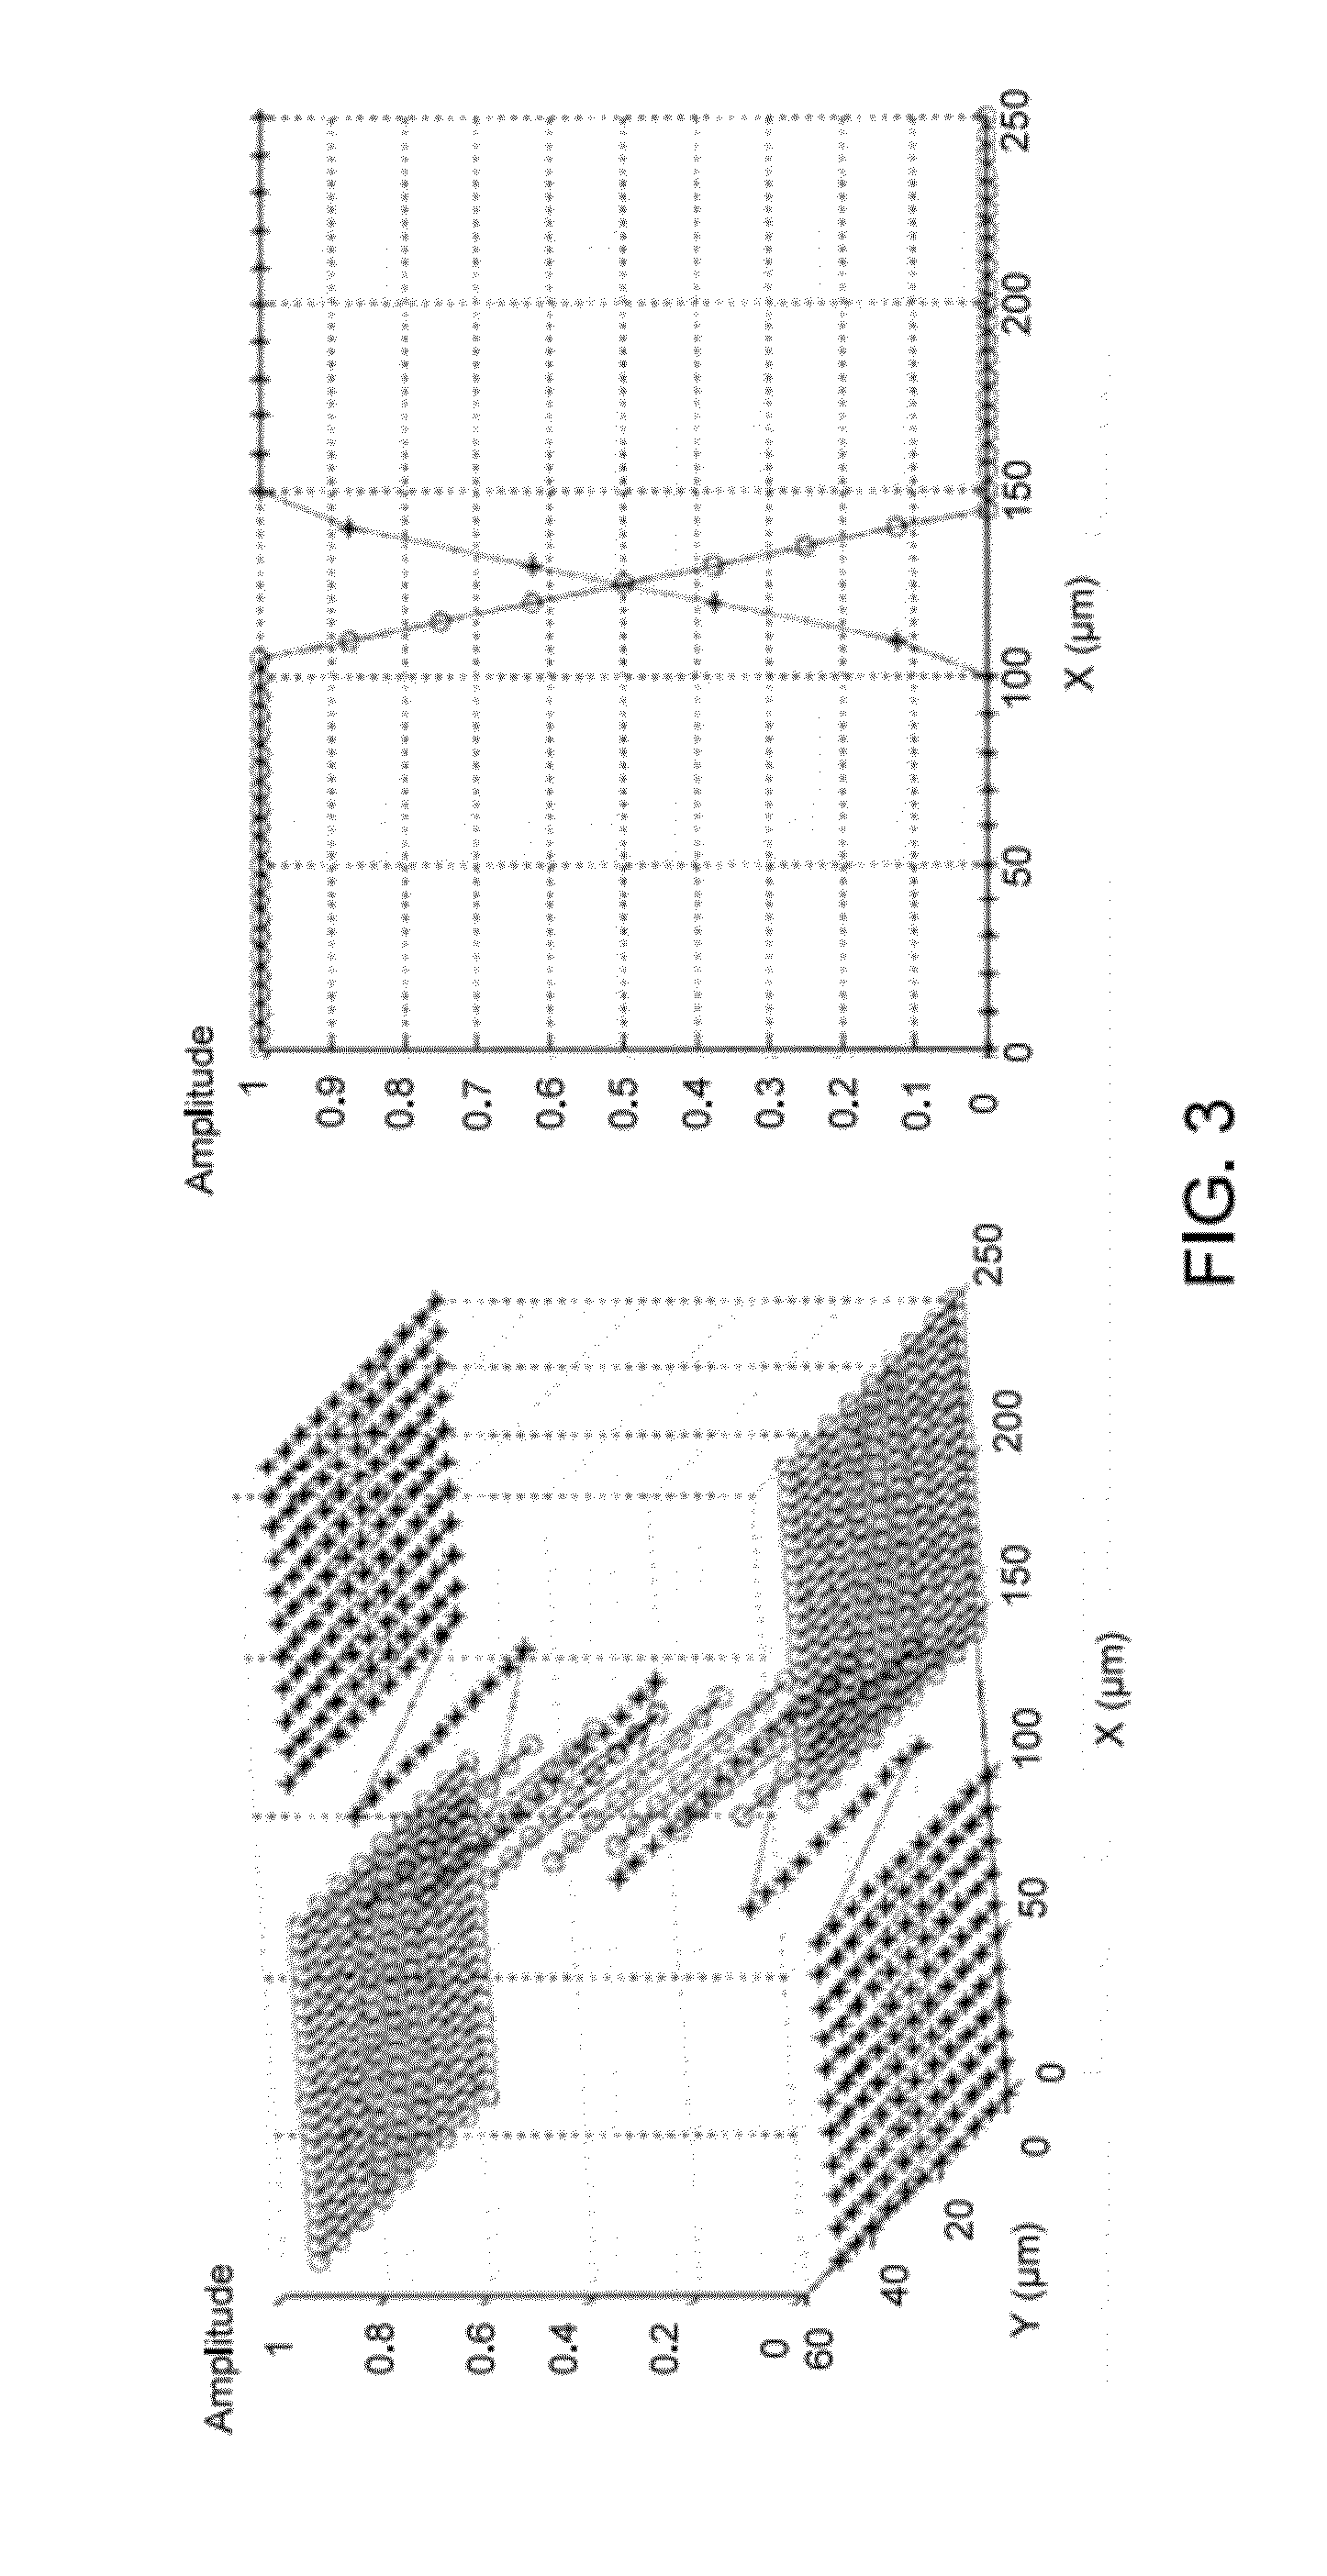 Laser processing systems and methods for beam dithering and skiving